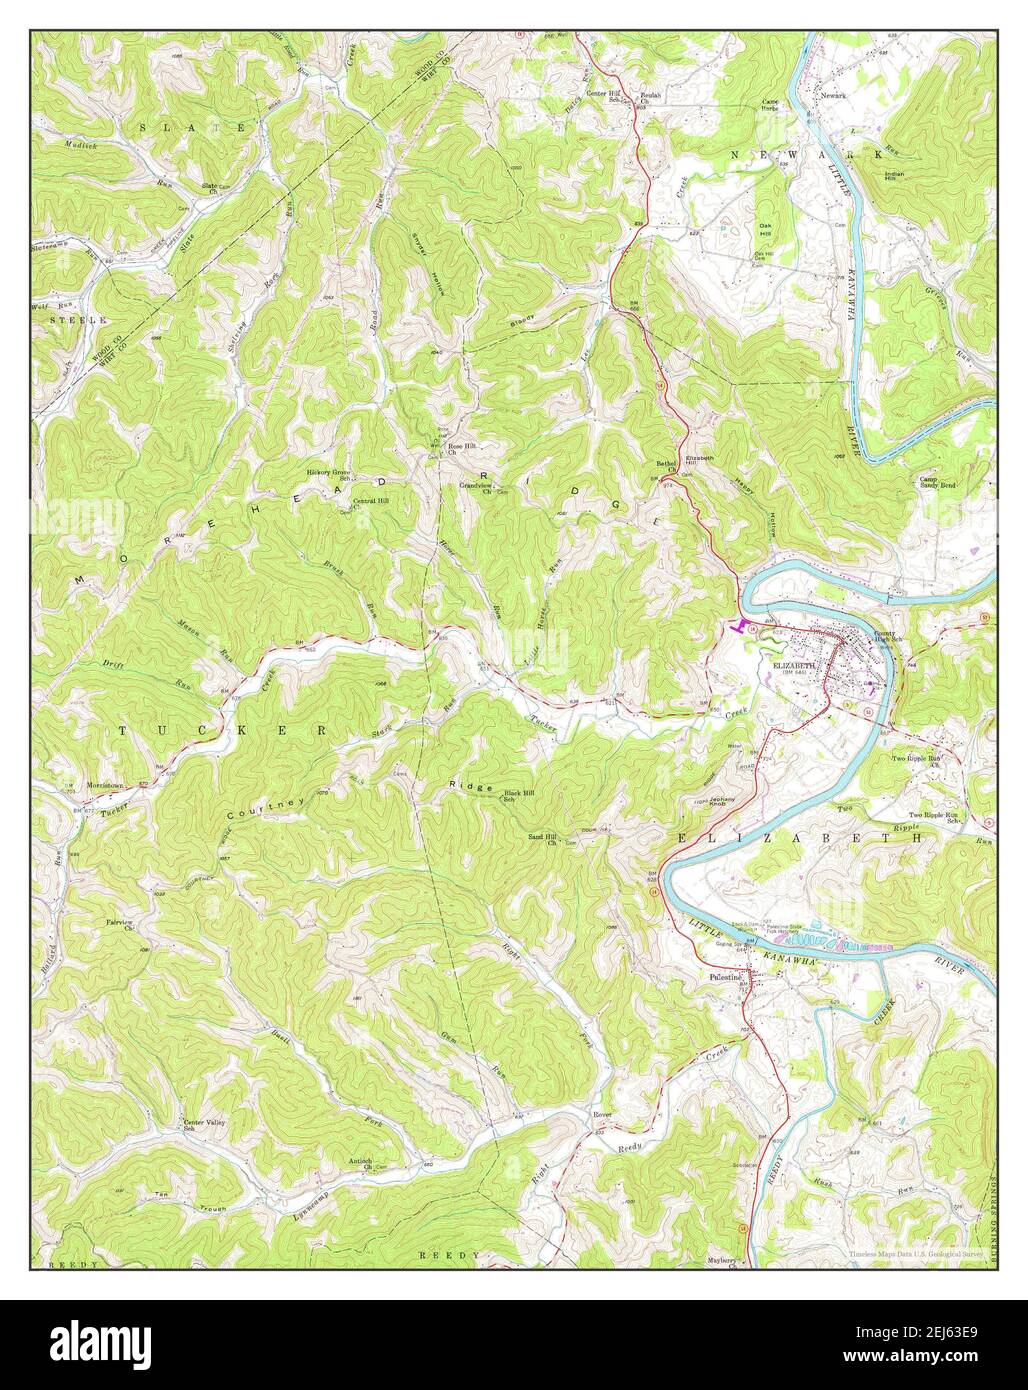 Elizabeth West Virginia Map 1957 124000 United States Of America By Timeless Maps Data Us Geological Survey 2EJ63E9 